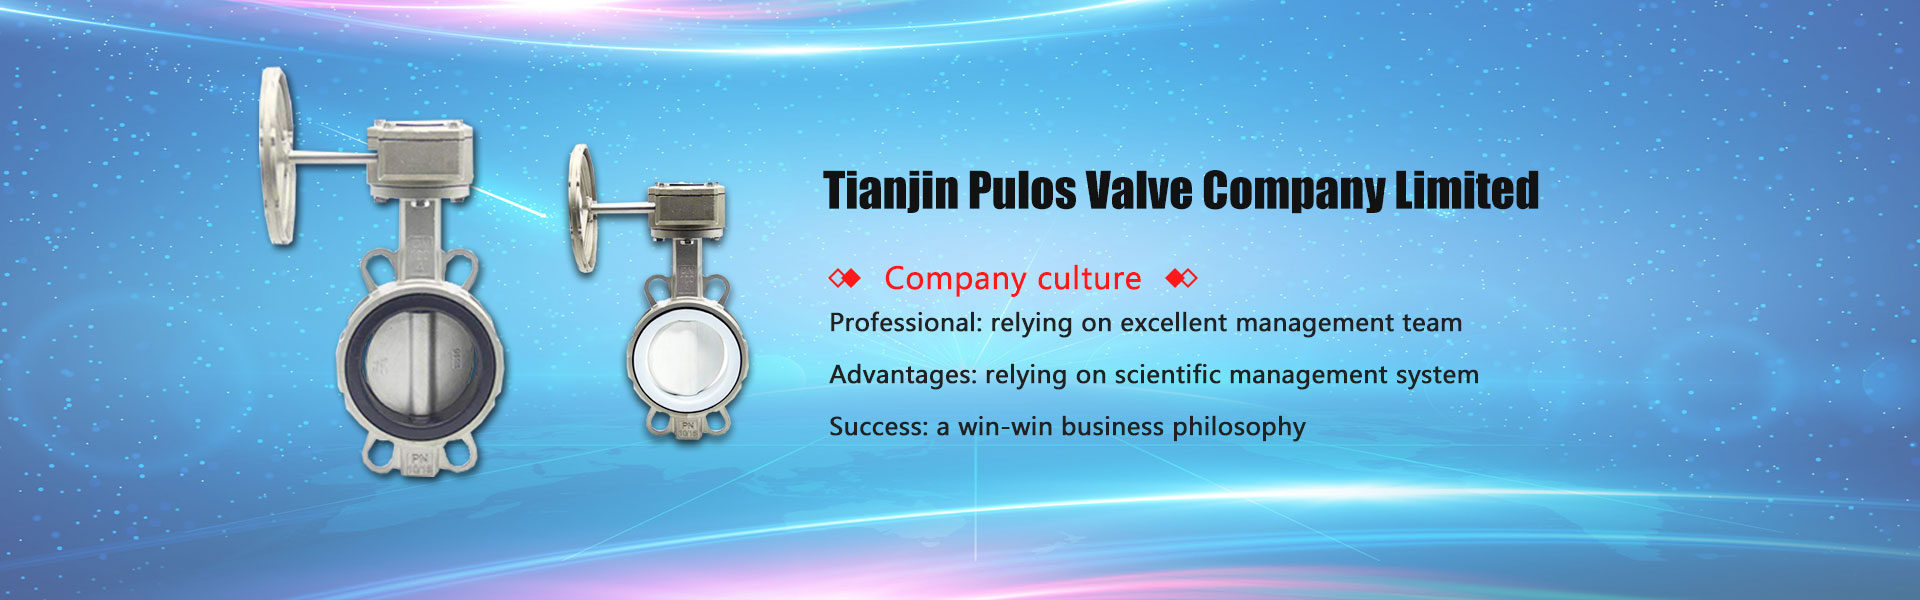 Tianjin Pulos Valve Company Limited